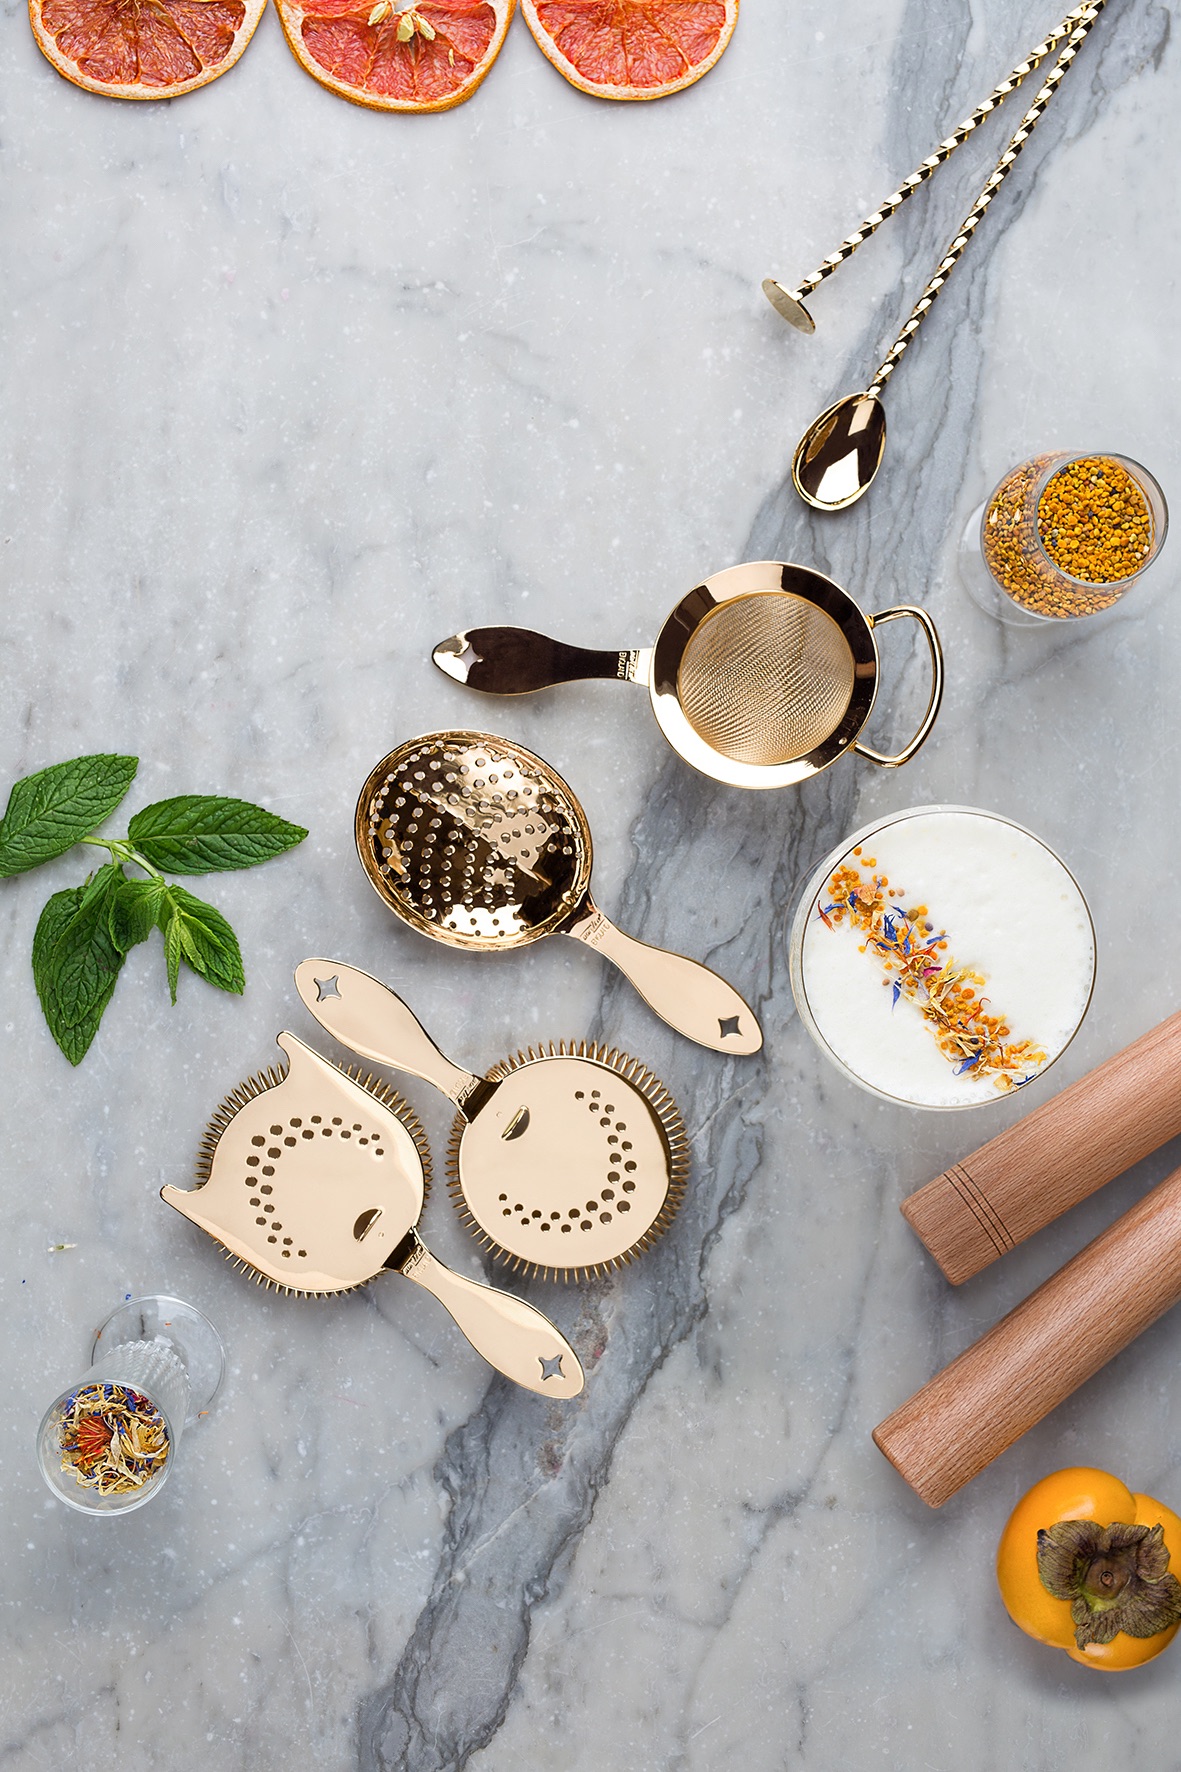 Premium gold plated coktail strainers